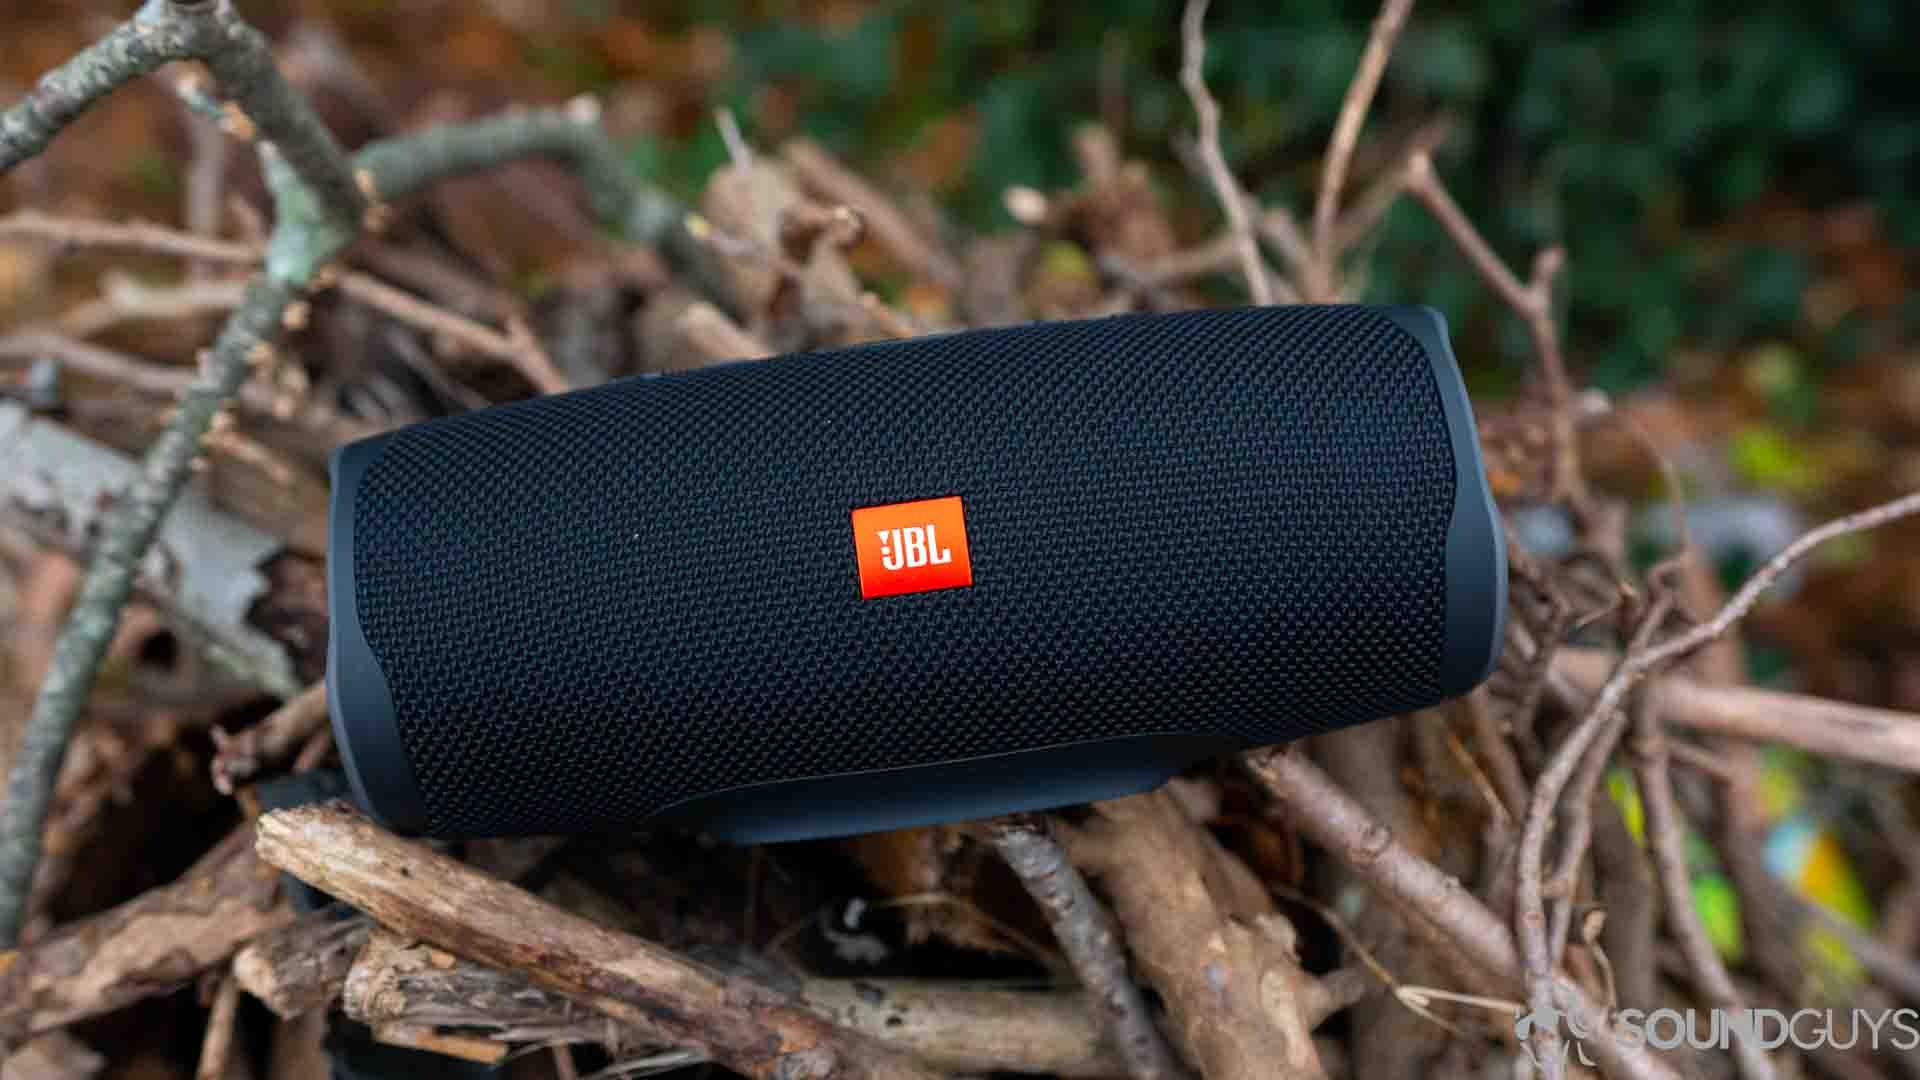 Jbl Charge 4 Review: Worth The Money, Kind Of - Soundguys